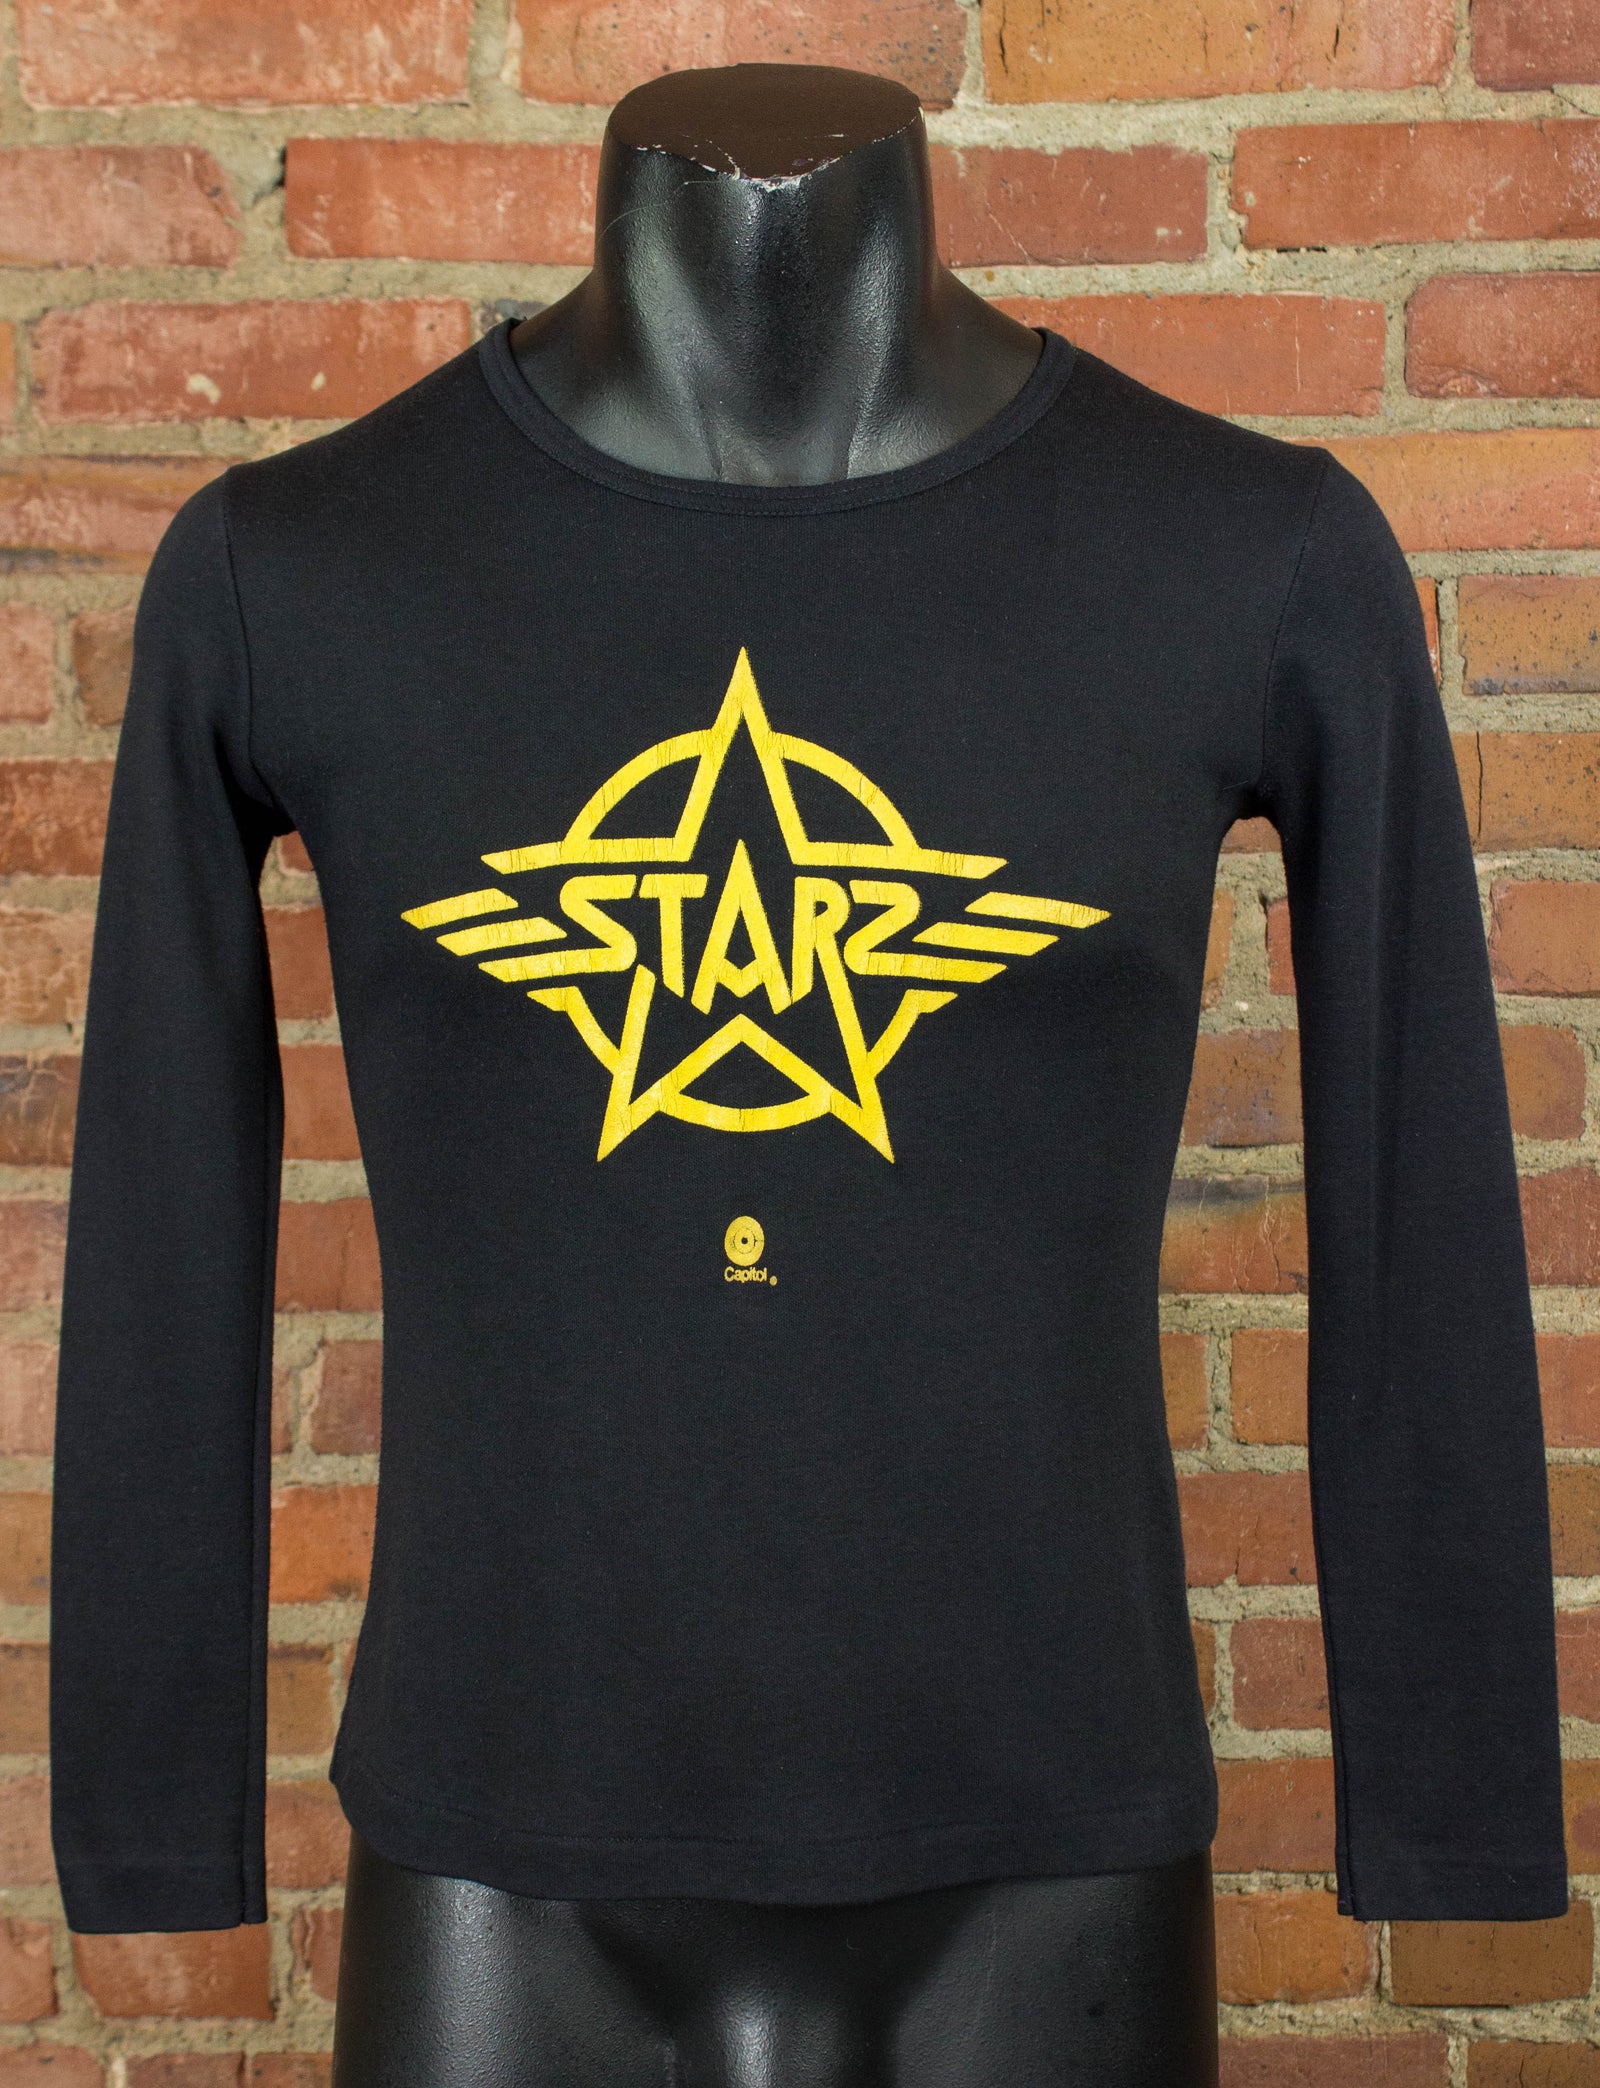 Vintage Starz Concert T Shirt 70s Self Titled Album Promo Black and Yellow Long Sleeve Small